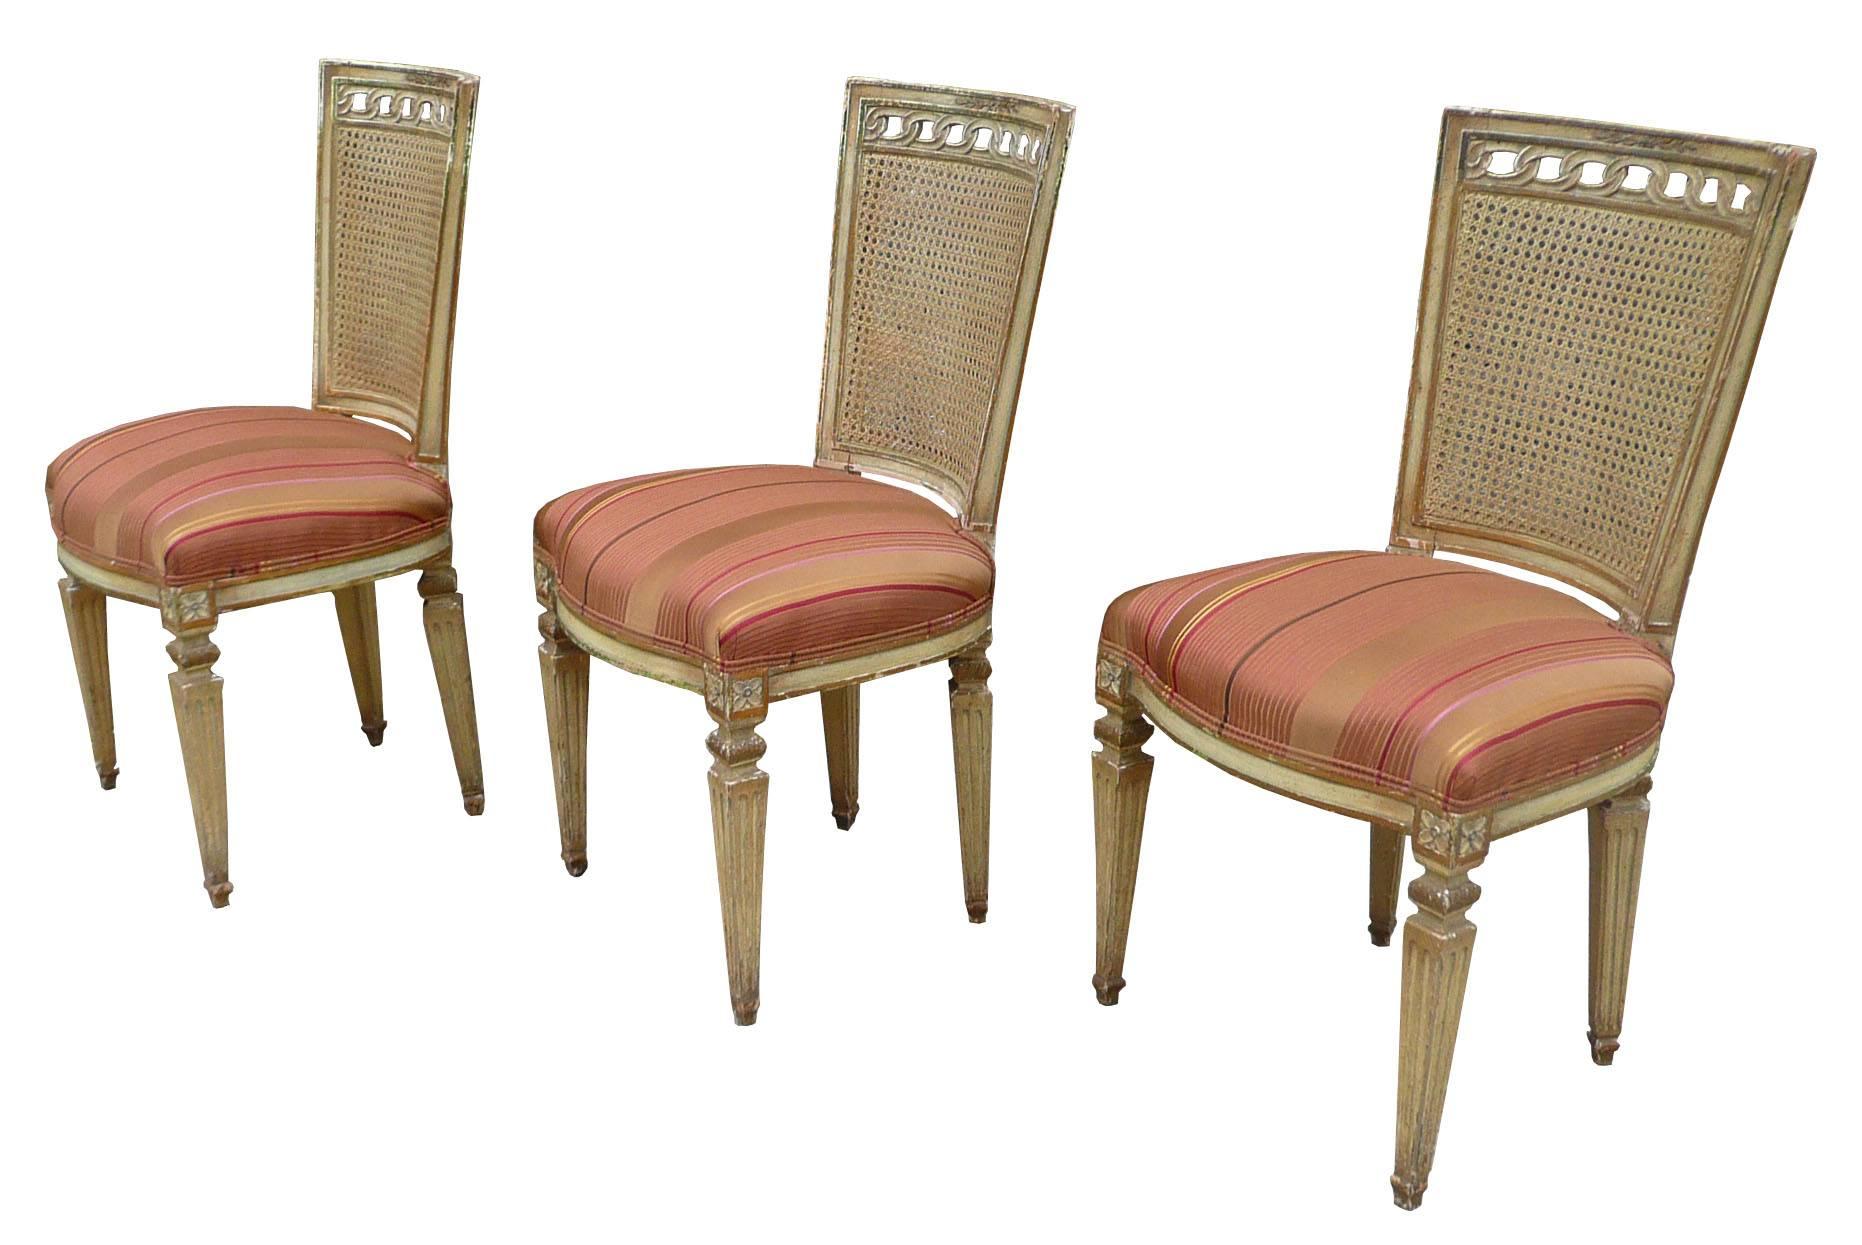 Set of three, Louis XVI style, side chairs with cane backs, carved and painted mahogany frames and upholstered seats, circa 1950s. Frames are in original condition and the seats are newly upholstered in a stripped silk.